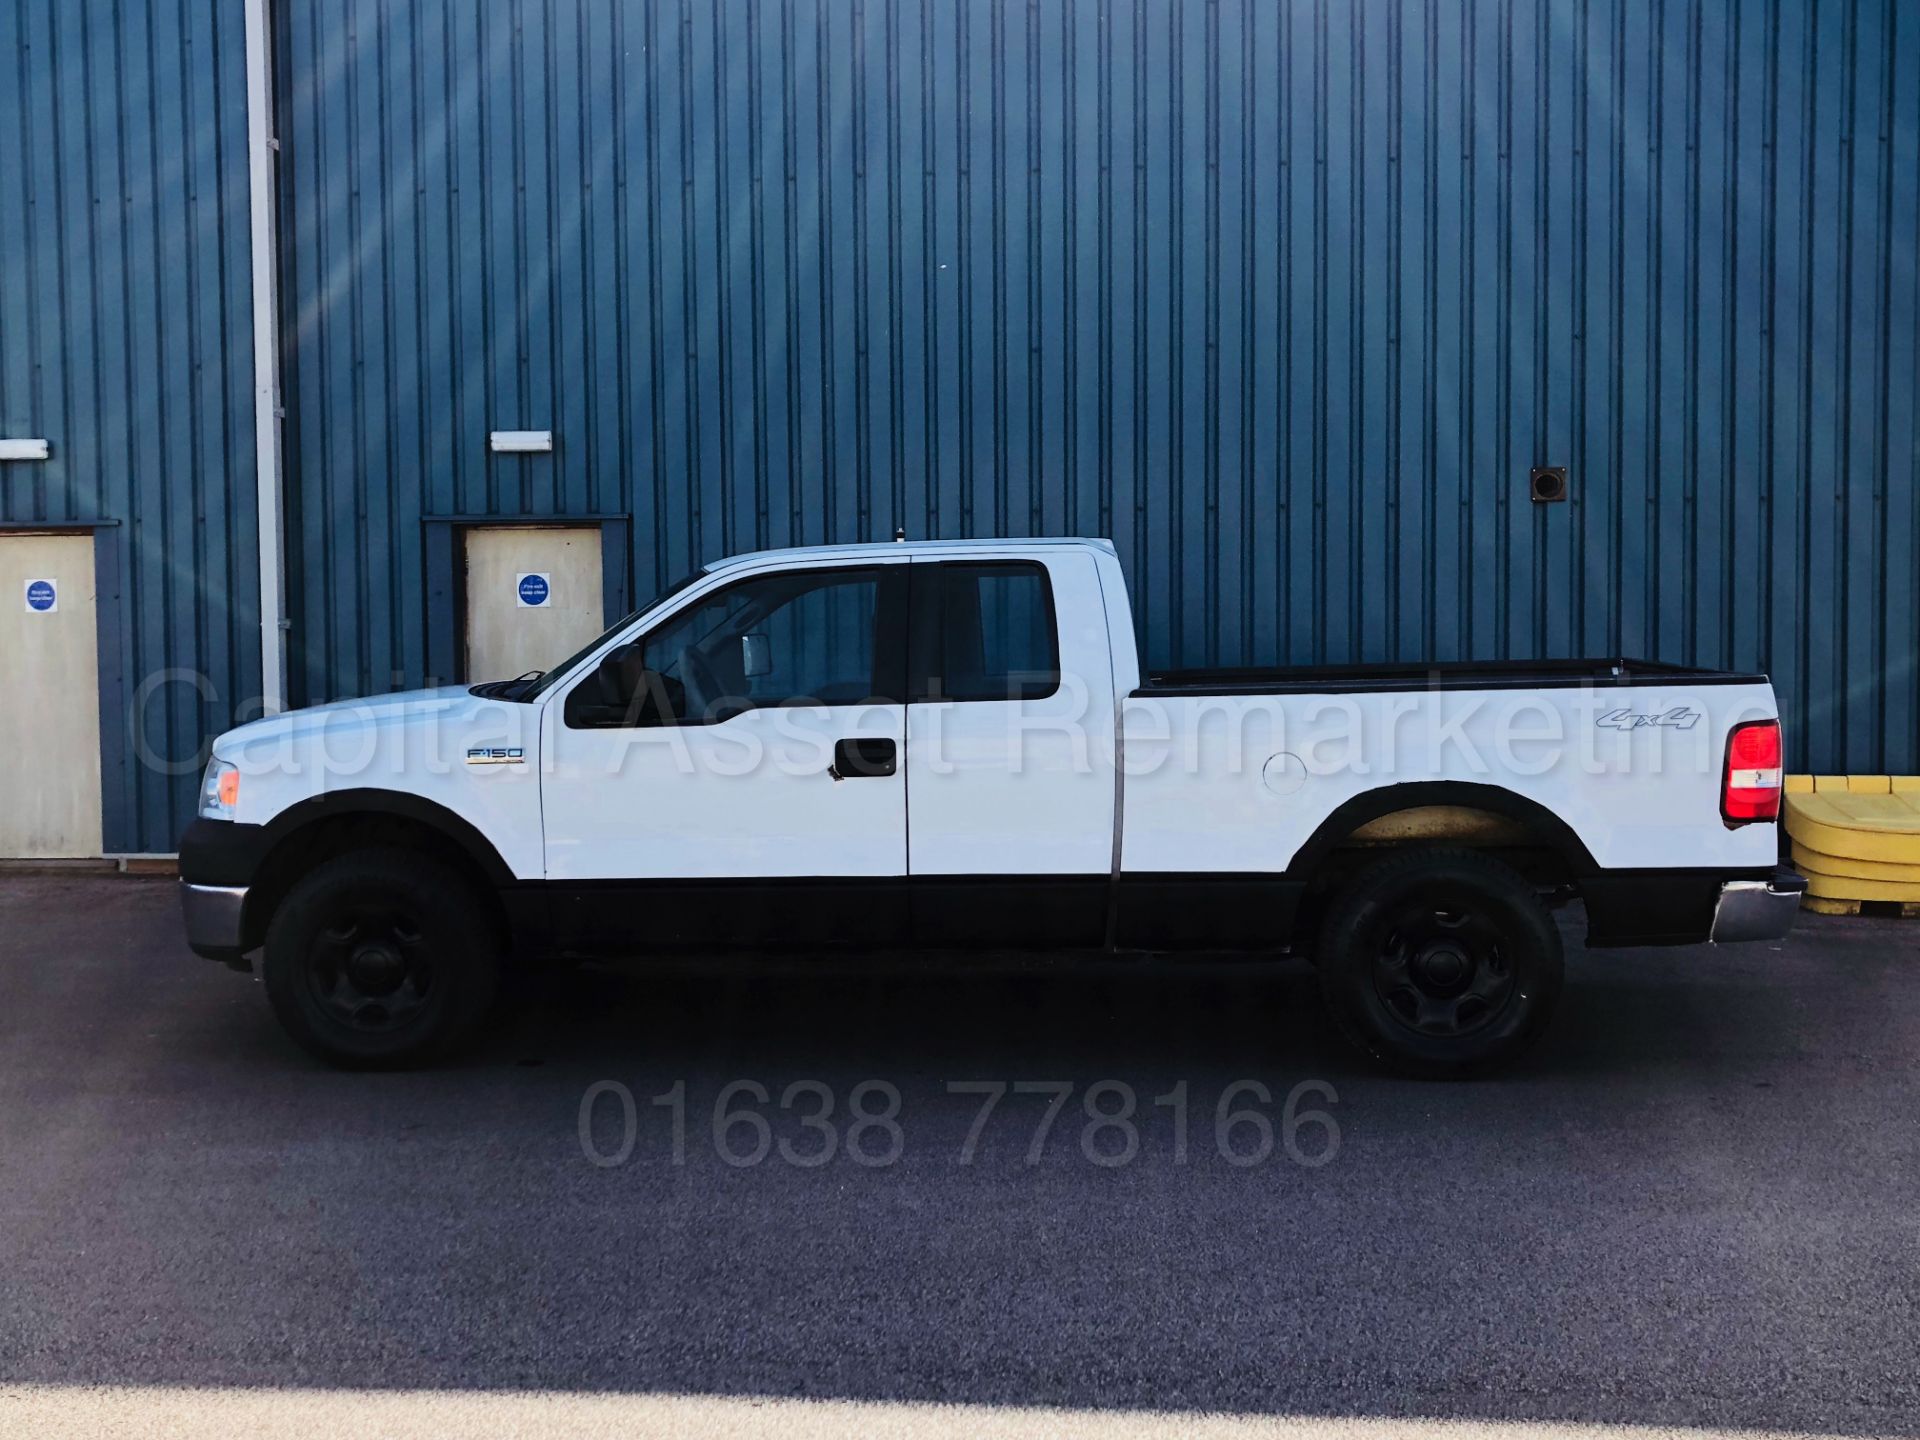 (On Sale) FORD F-150 5.4 TRITON V8 XL EDITION KING-CAB 2008 YEAR**4X4**AUTOMATIC**6 SEATS* - Image 7 of 26